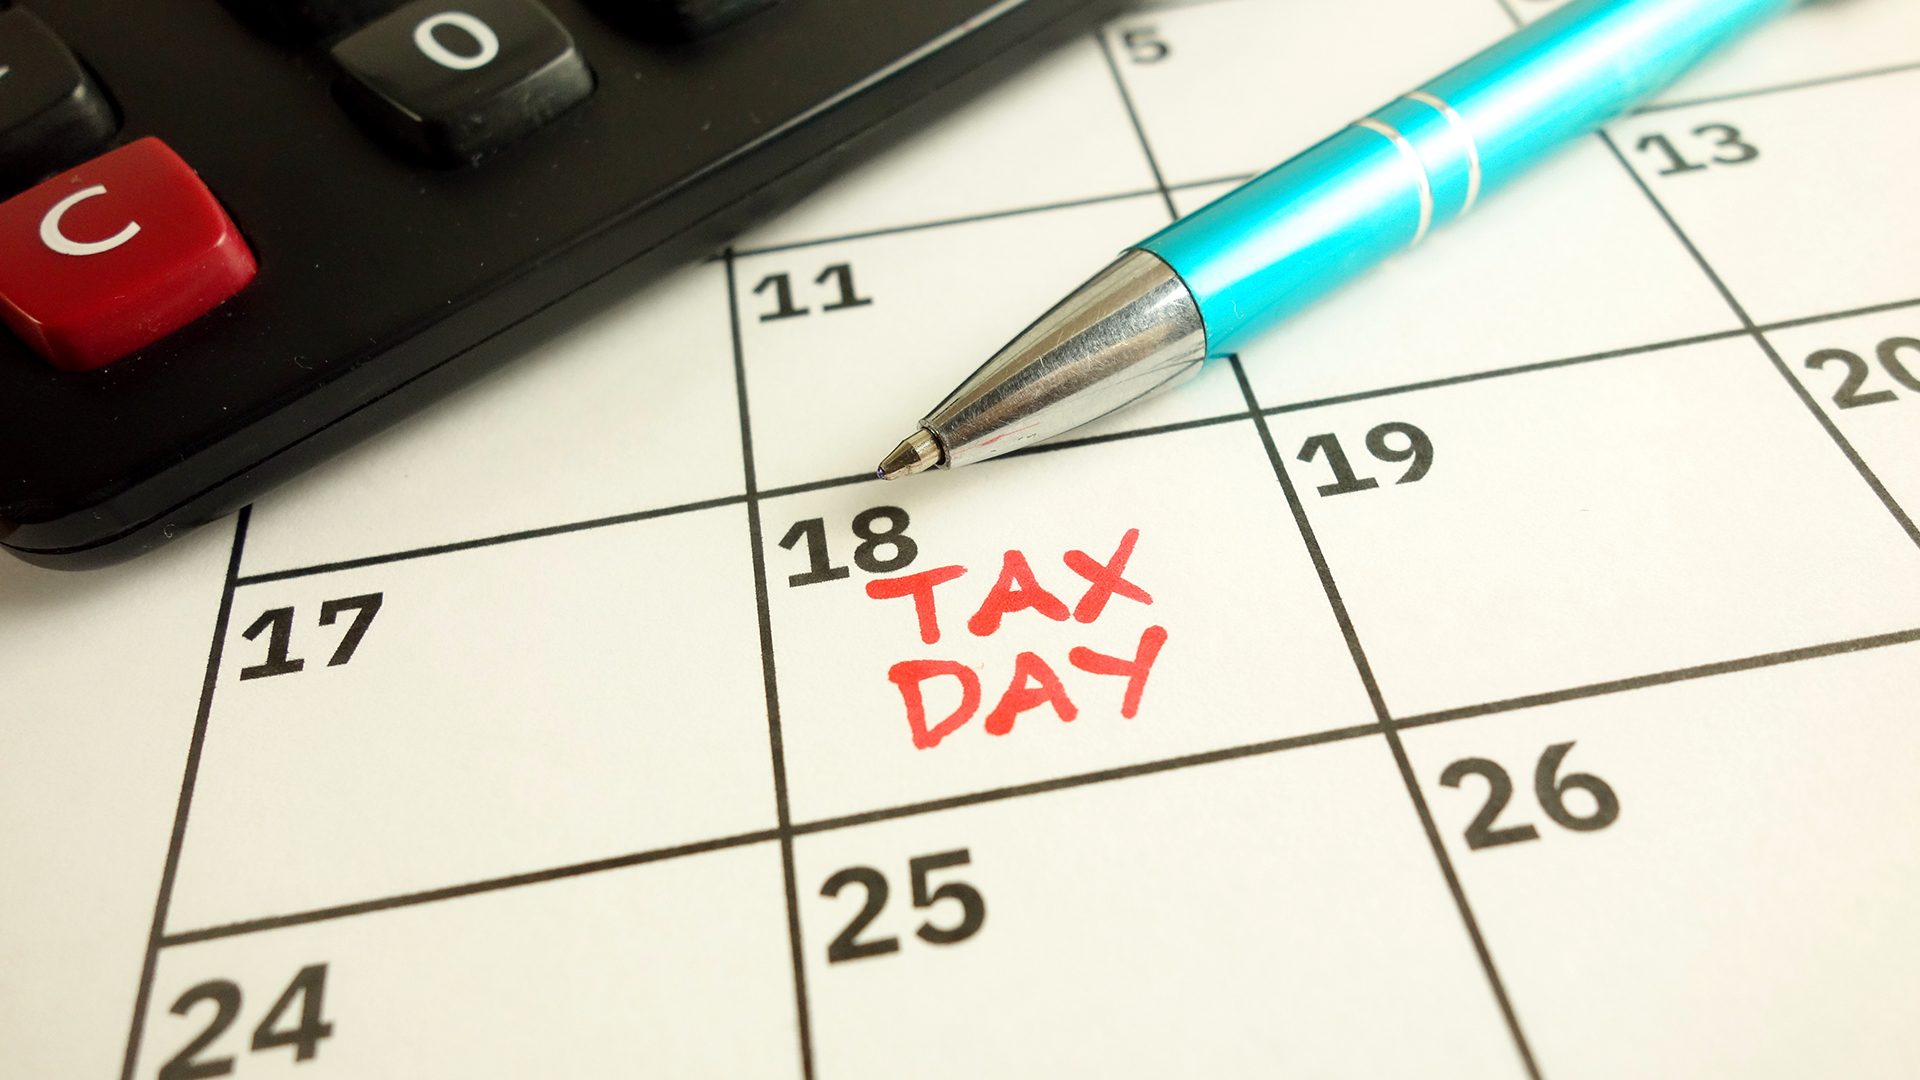 [Ask the Tax Whiz] Can I still amend my ITR after the April 18 deadline?